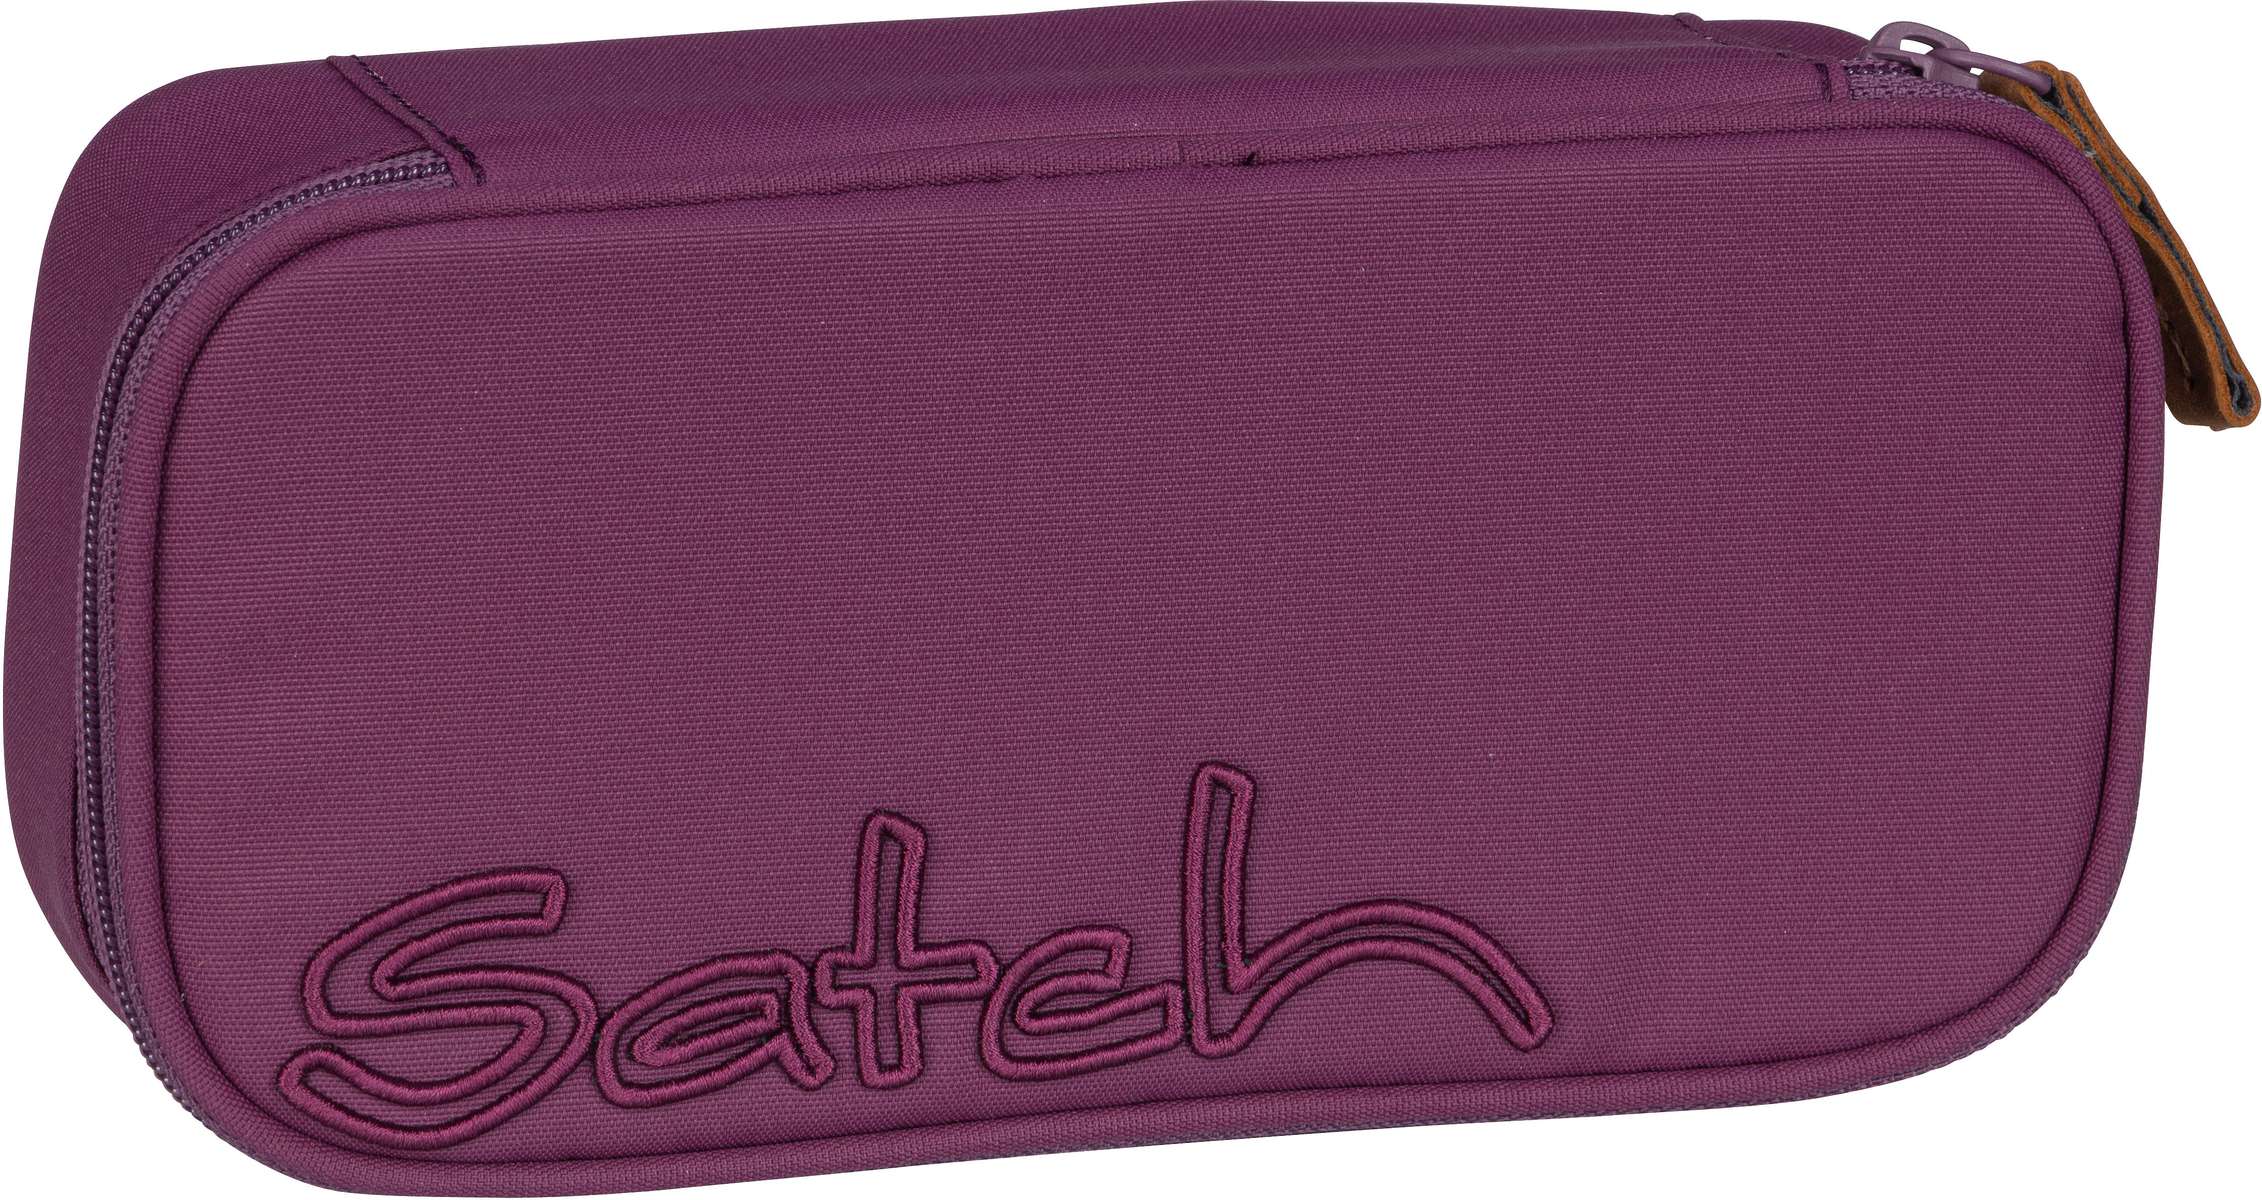 satch satch Schlamperbox Edition - Nordic Berry